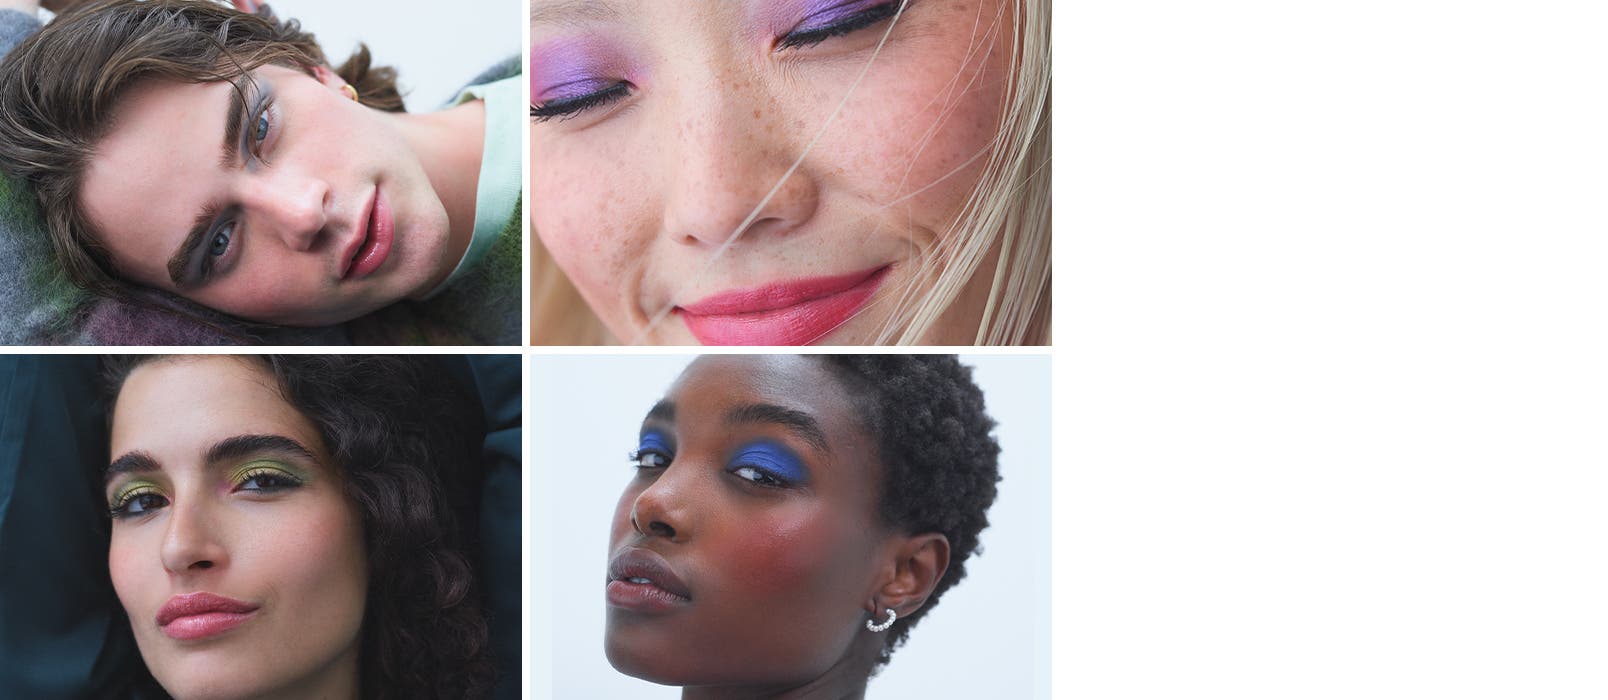 Four models wearing bright eyeshadow, blush and lip color.